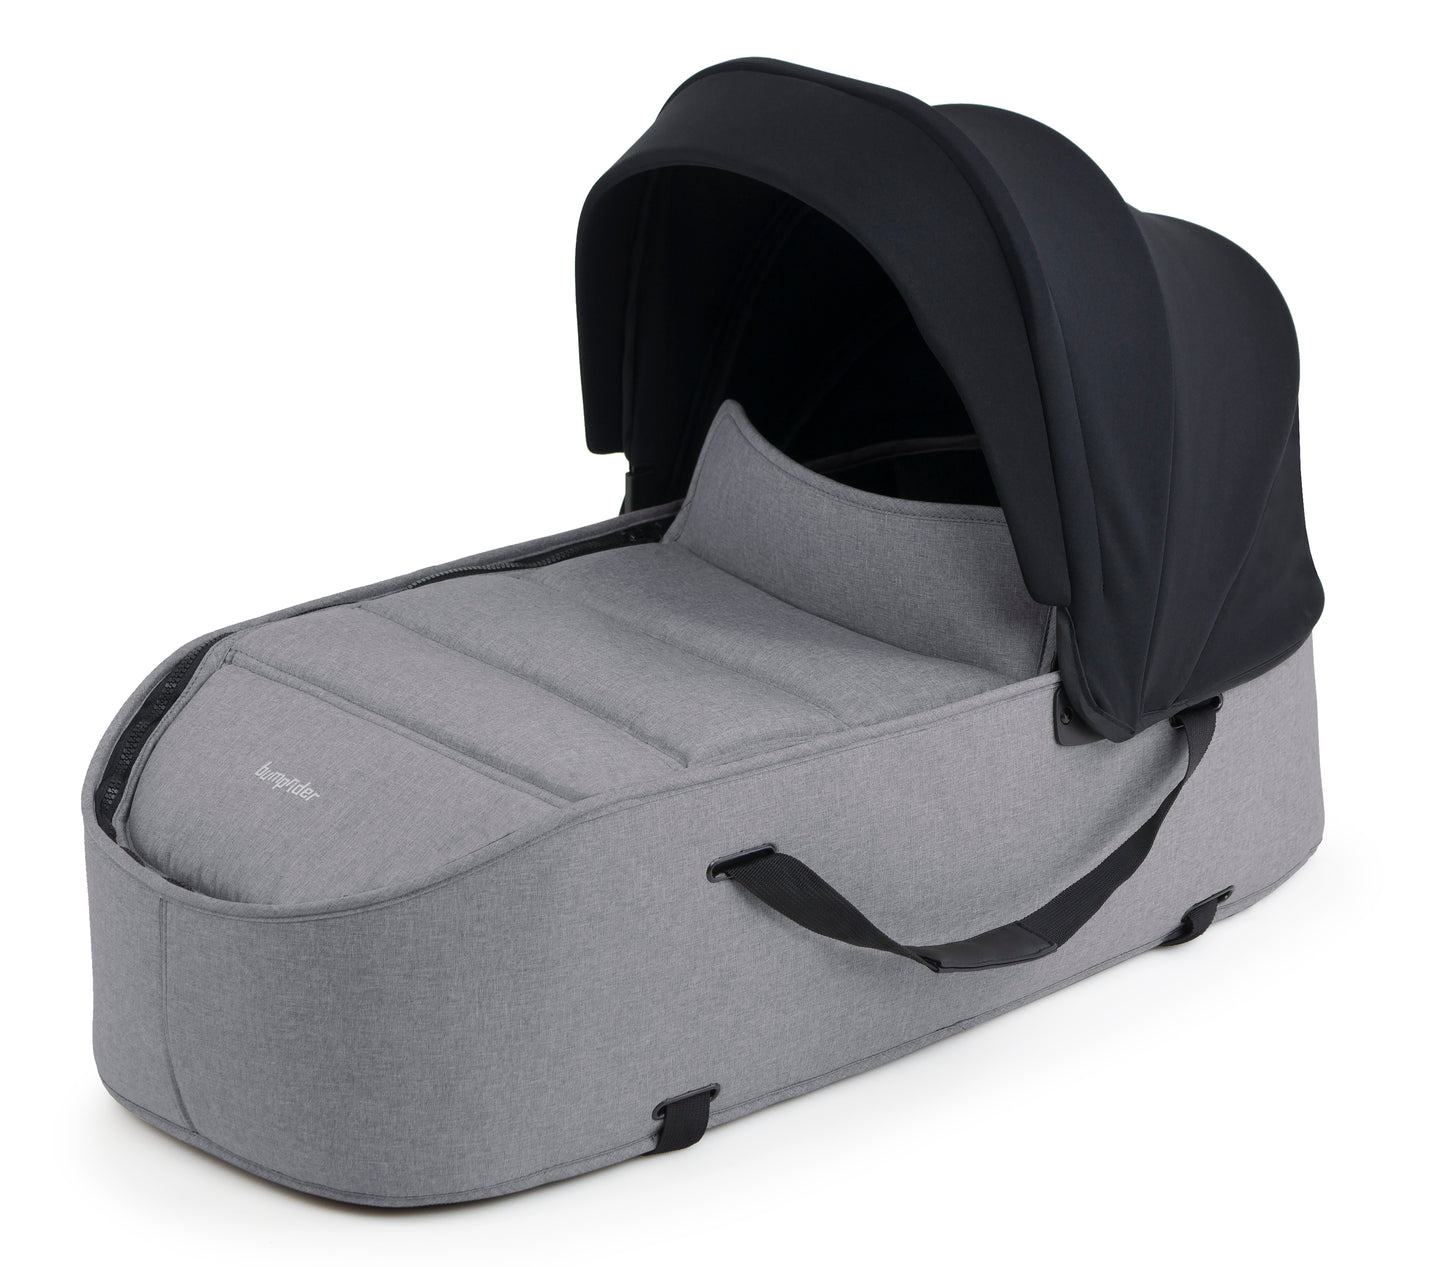 CONNECT 2 CARRYCOT